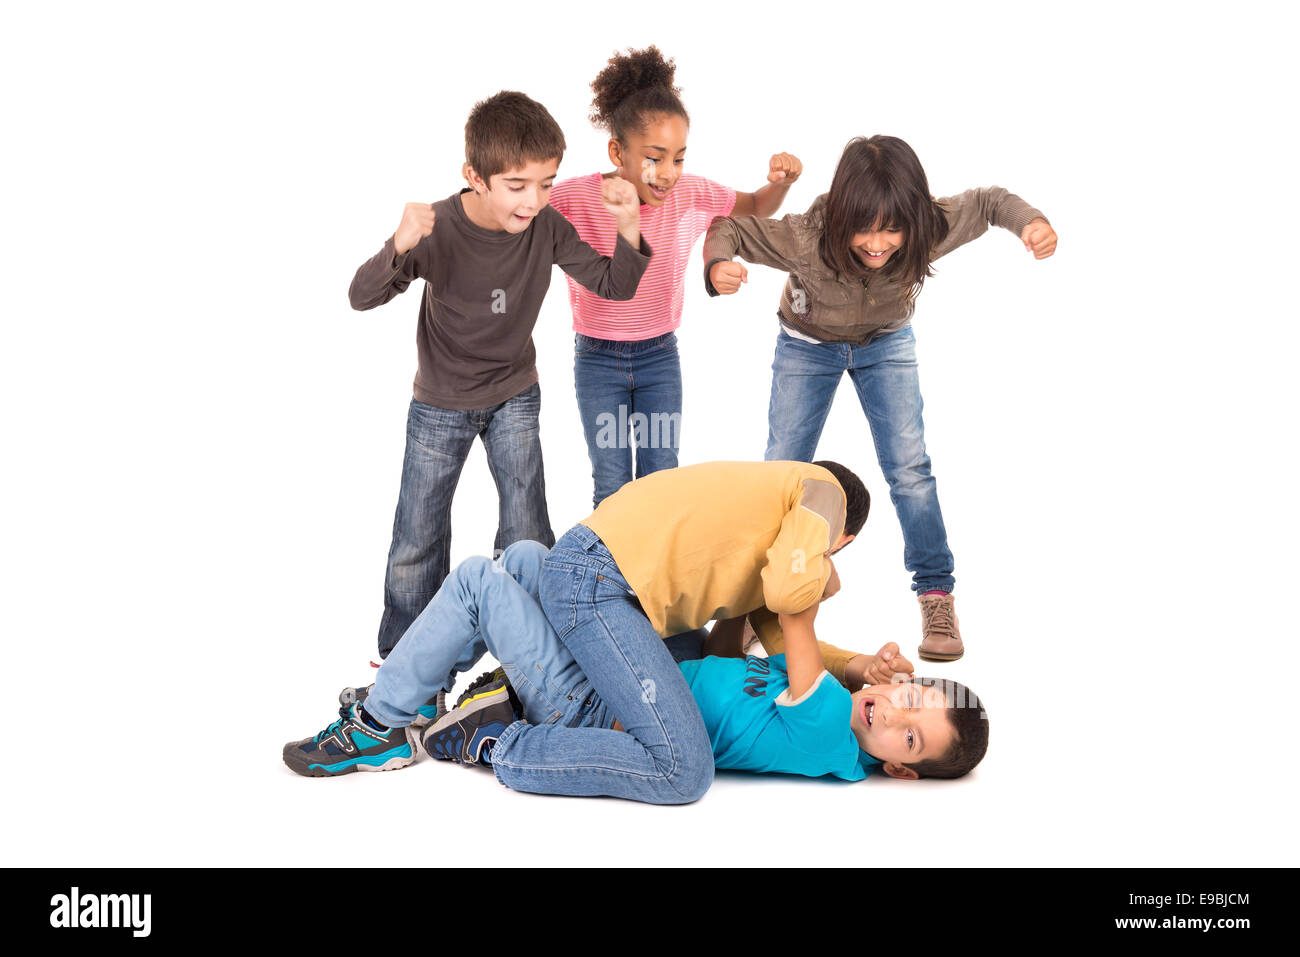 Boys fighting with other kids cheering isolated in white Stock Photo